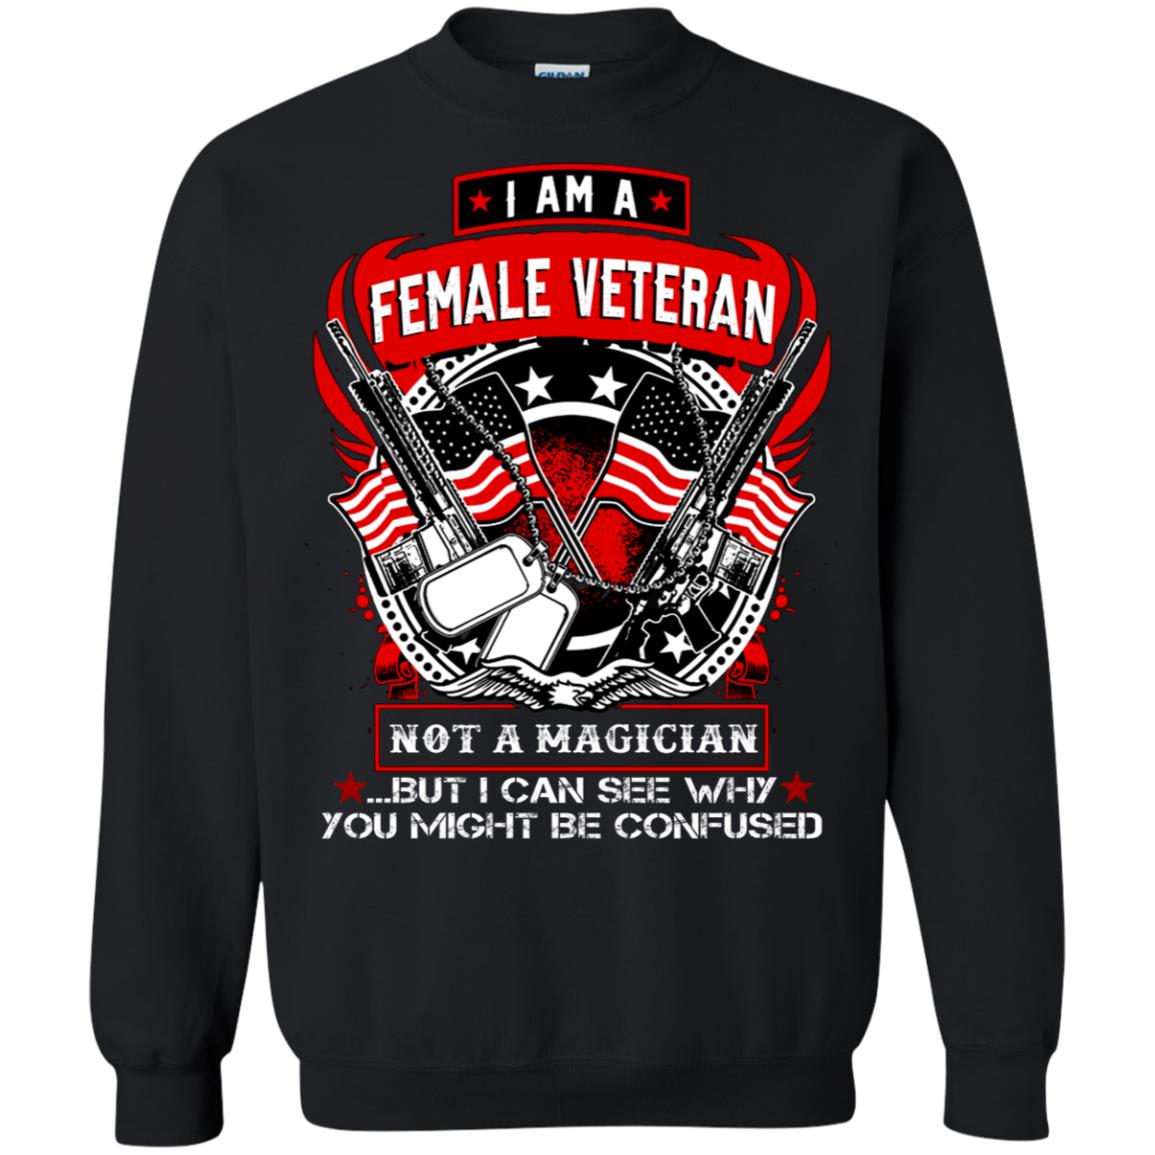 I Am A Female Veteran Not A Magician But I Can See Why You Might Be Confused ShirtG180 Gildan Crewneck Pullover Sweatshirt 8 oz.